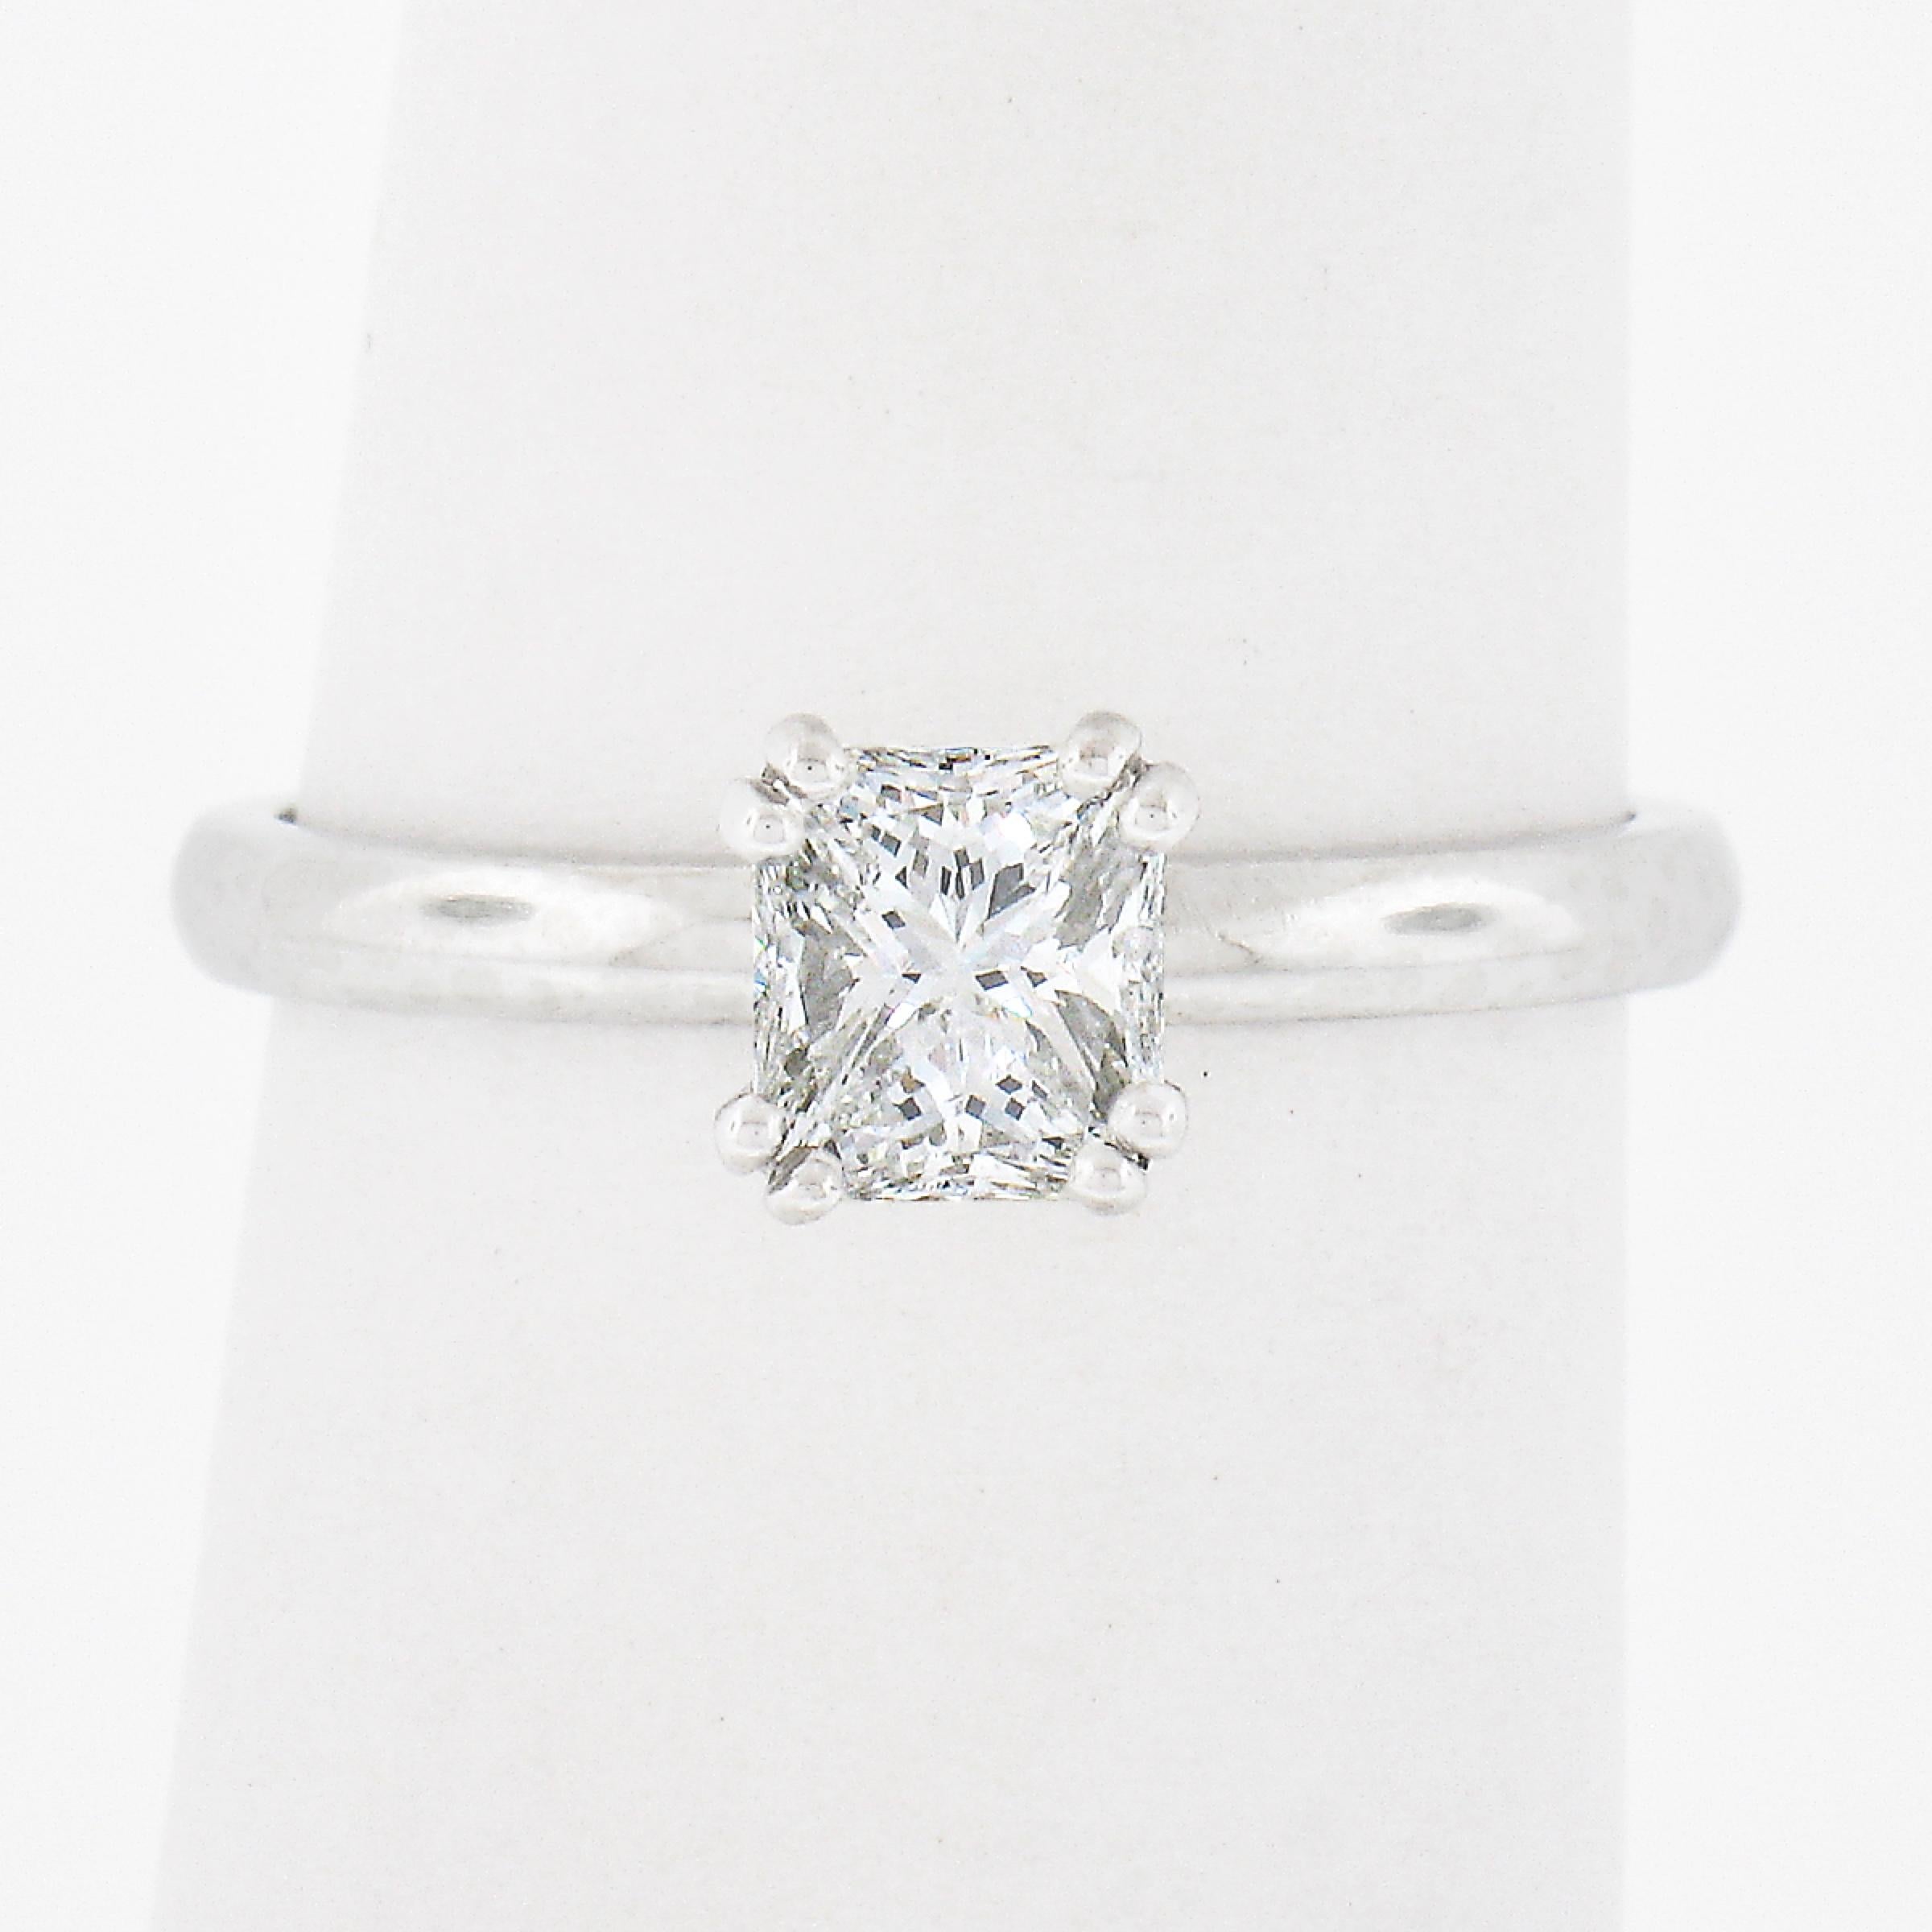 This classic and simply gorgeous solitaire engagement ring is crafted in solid platinum and features a very fine quality emerald cut diamond neatly set at its center. This petite, GIA certified, solitaire weighs exactly 0.68 carats and displays